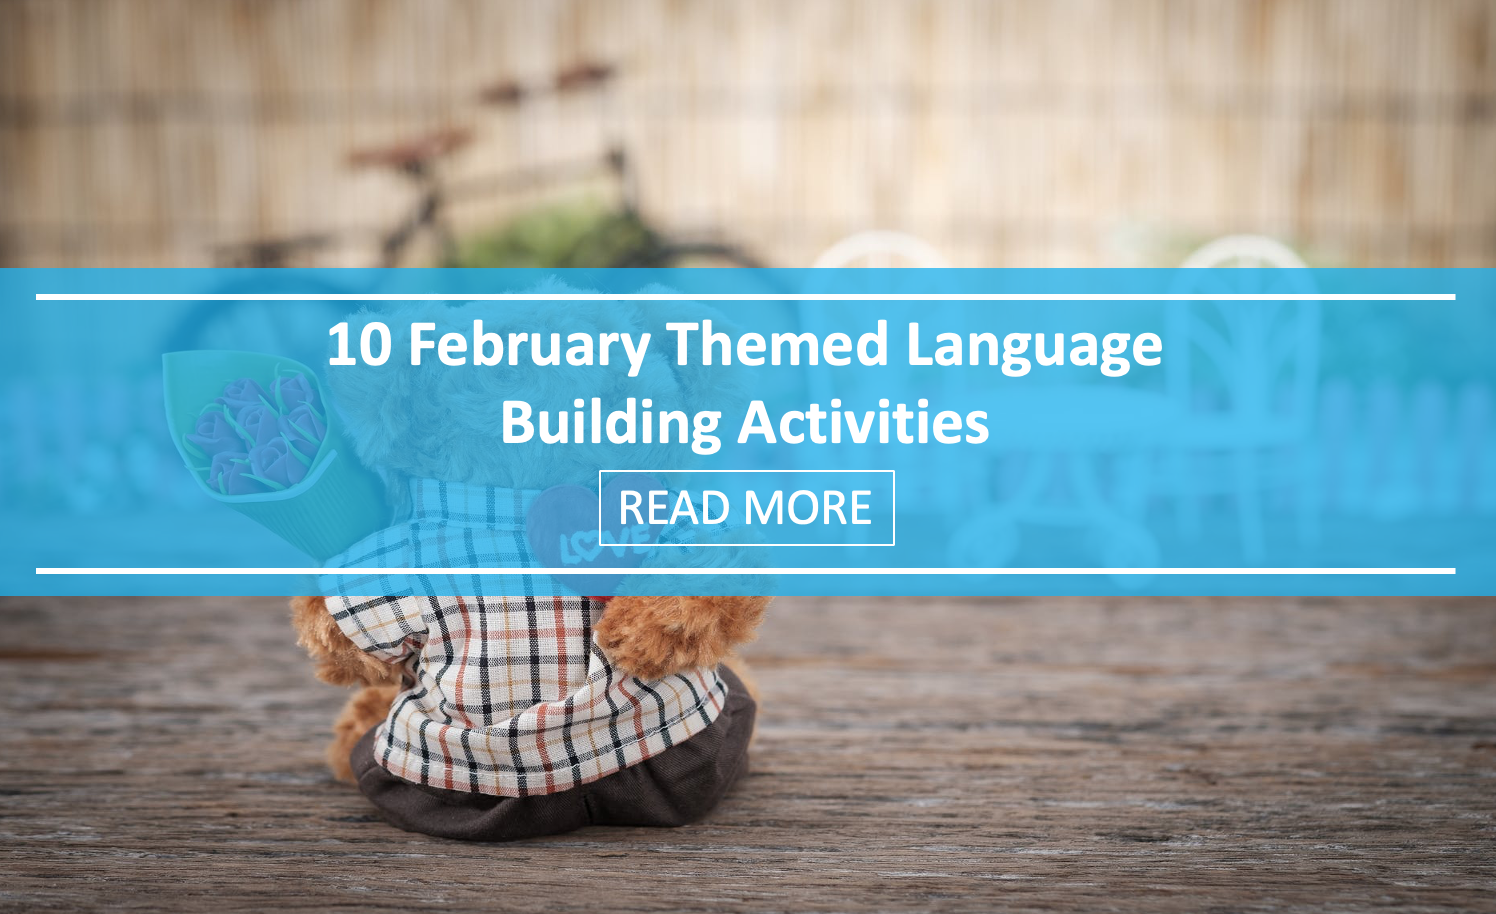 10 February Themed Language Building Activities